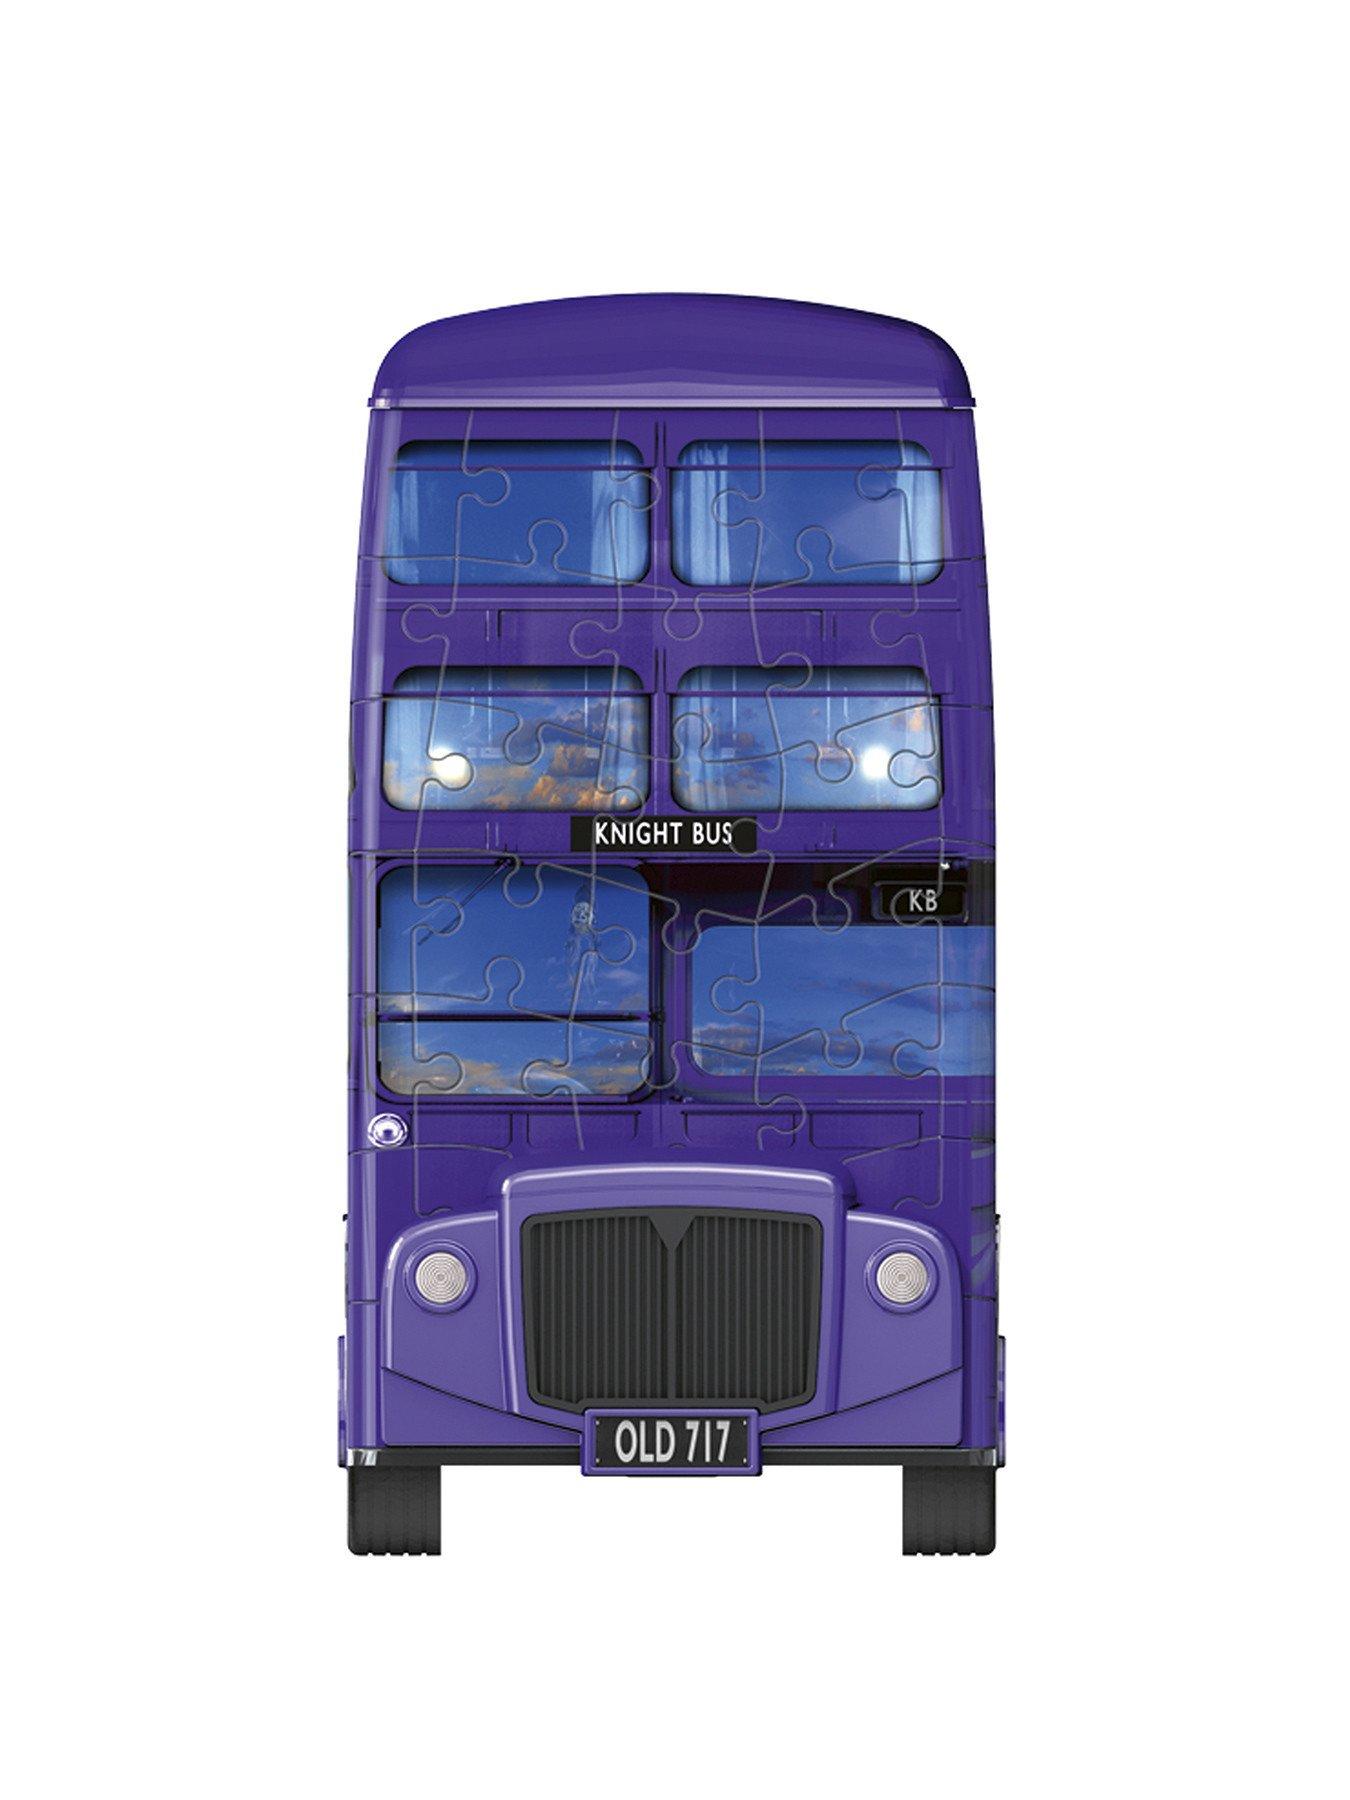 Front view of the 3D puzzle of the Knight Bus from the Harry Potter films.